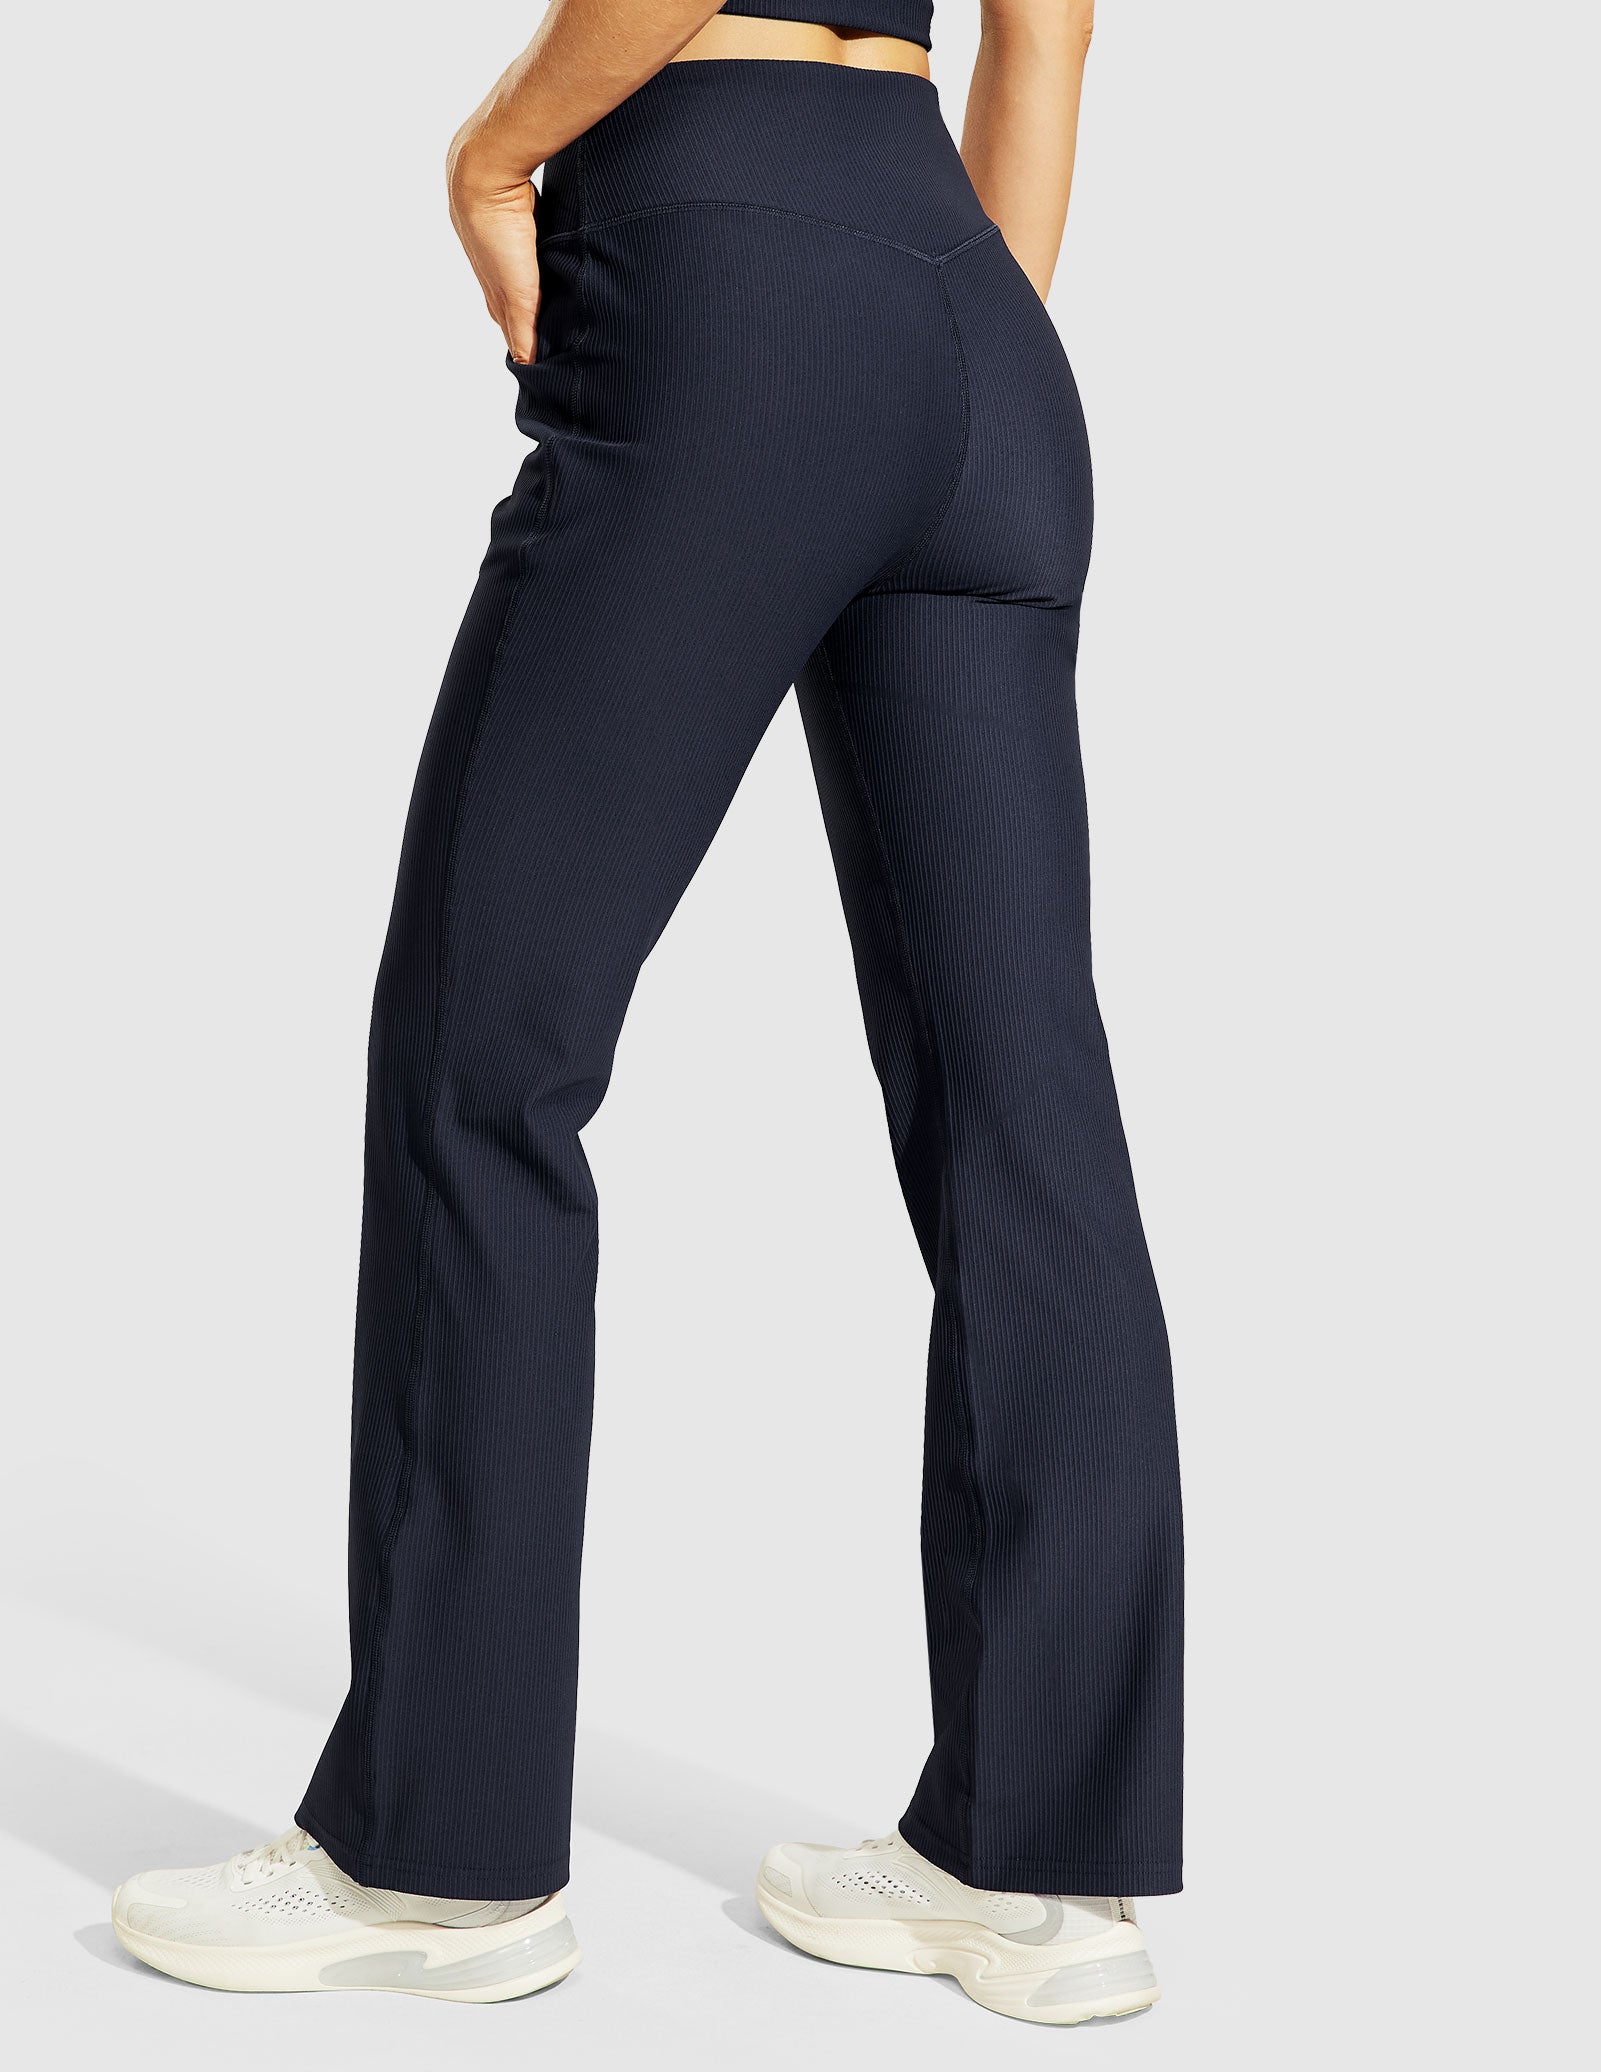 Women's High Waisted Bootcut Yoga Pants Ribbed Flare Leggings - Navy Blue /  XS